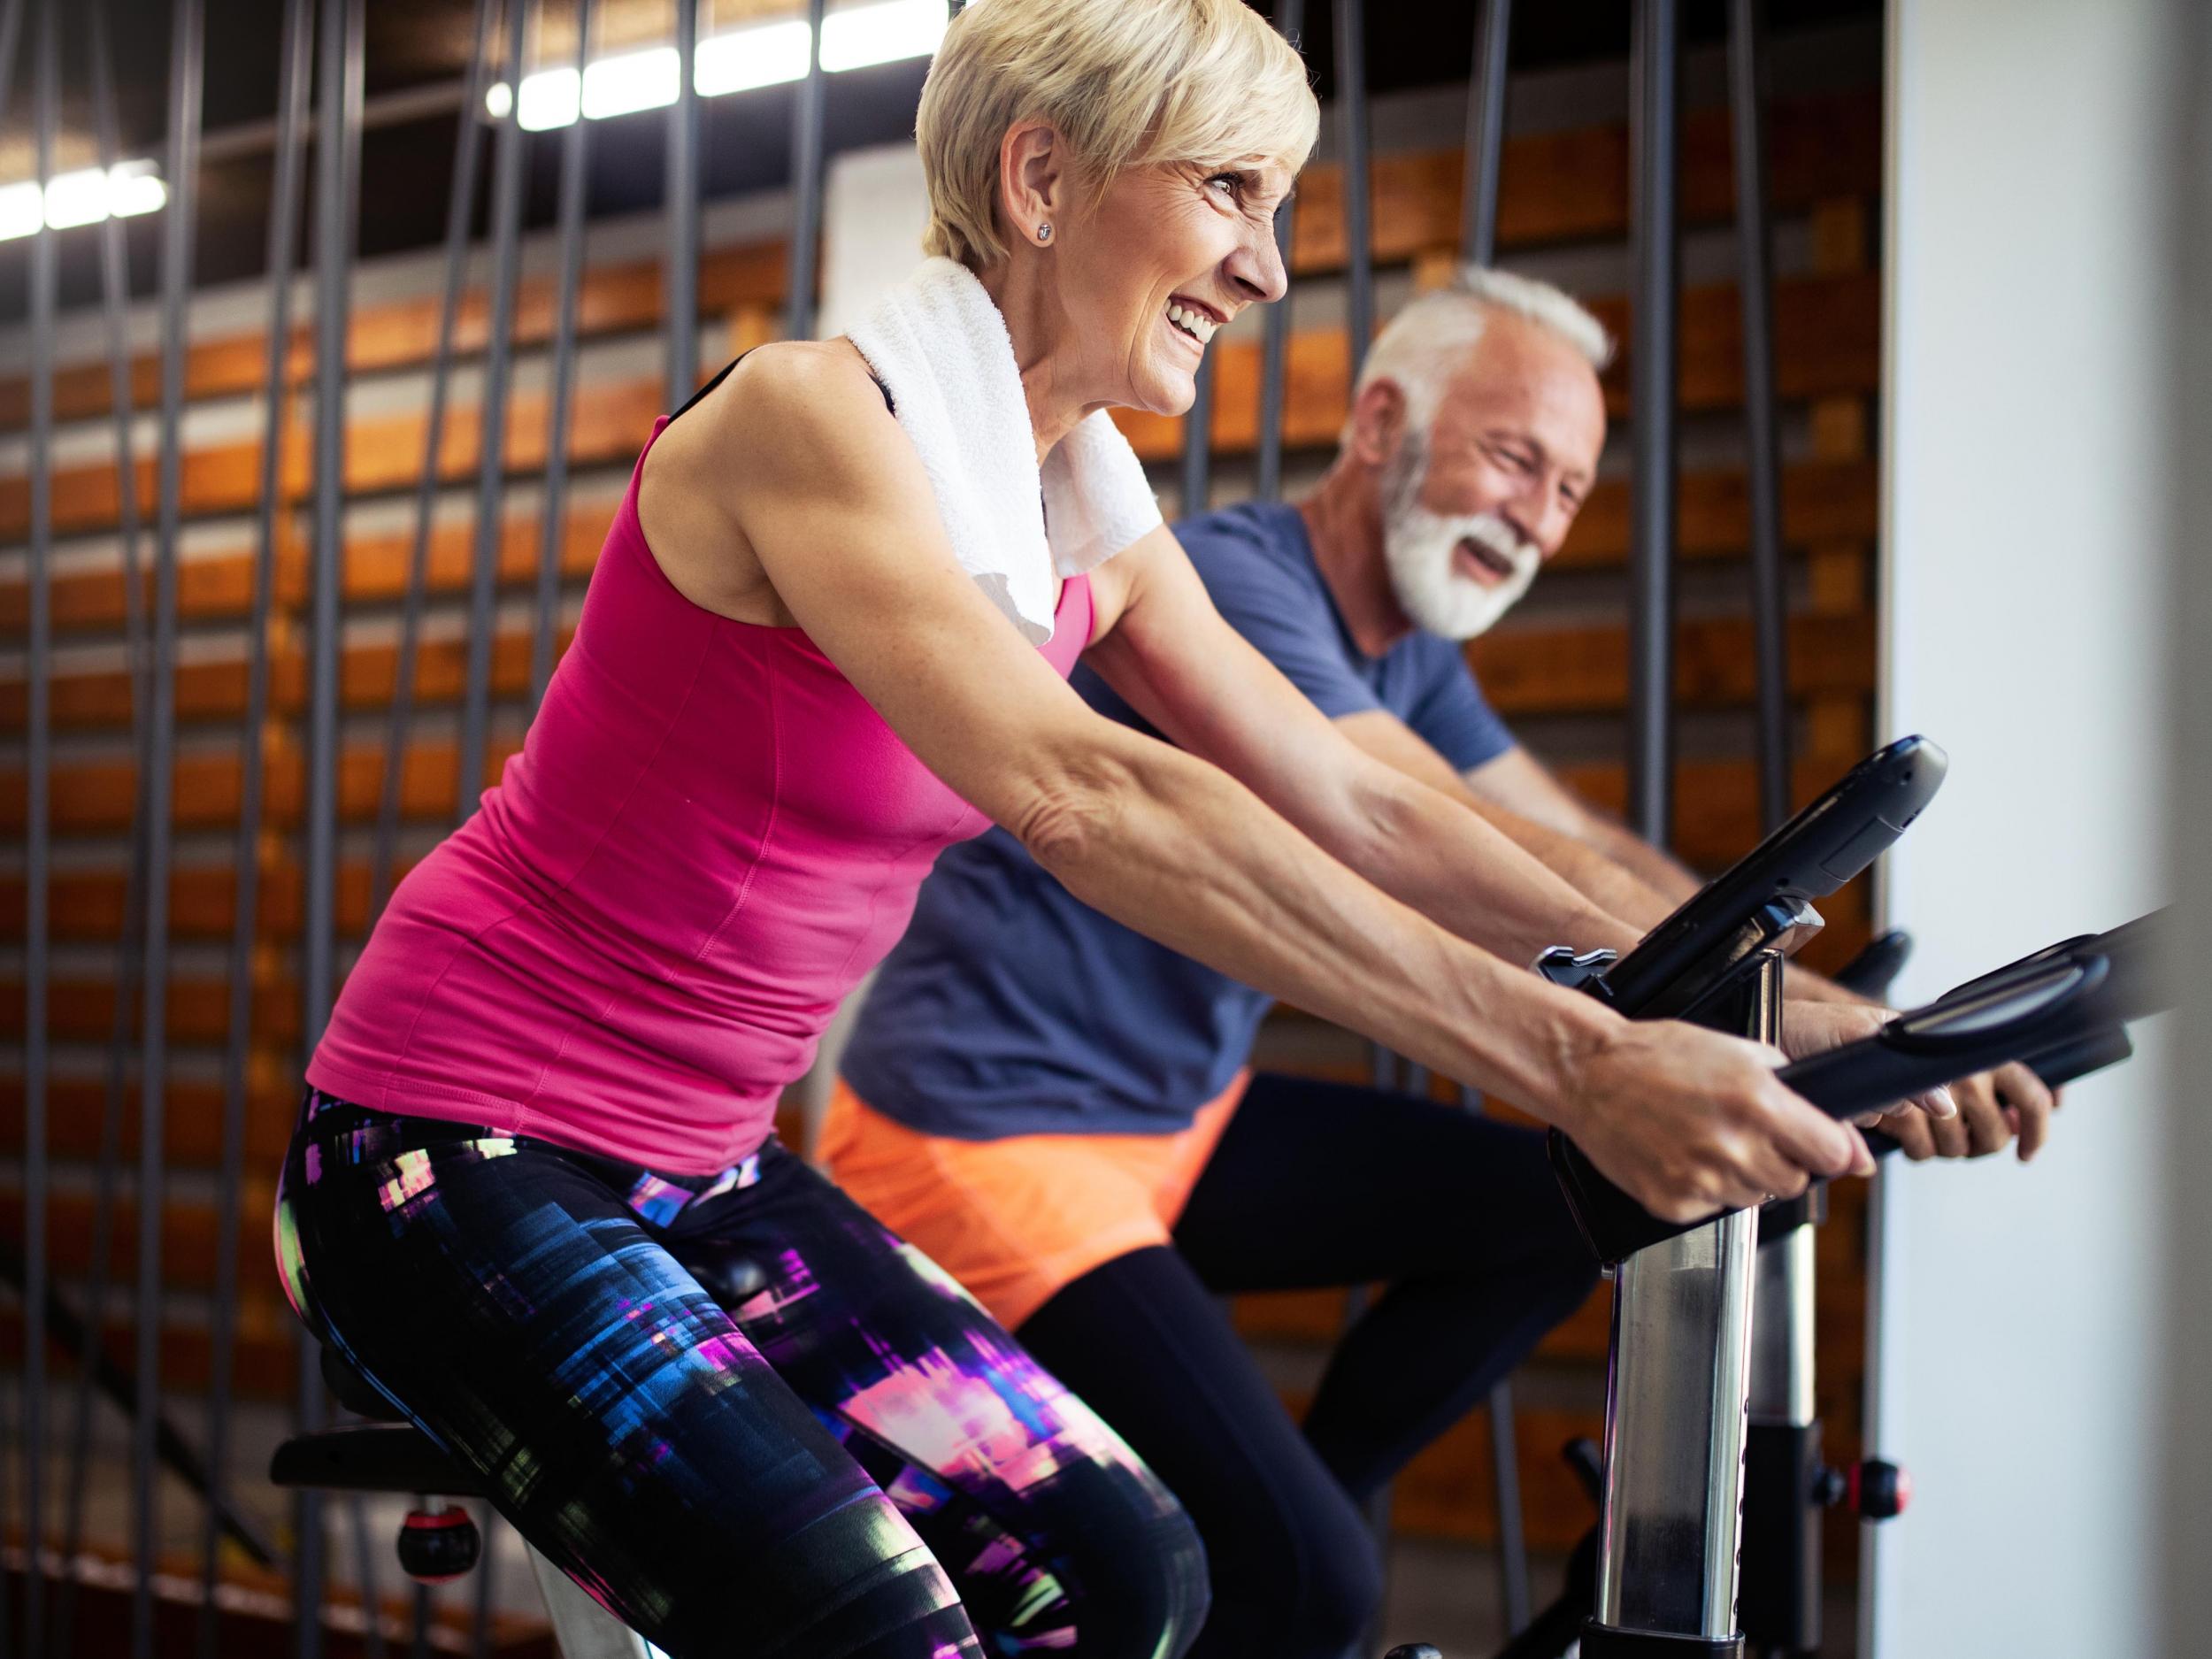 Cycling is good for older joints as it puts less pressure on them